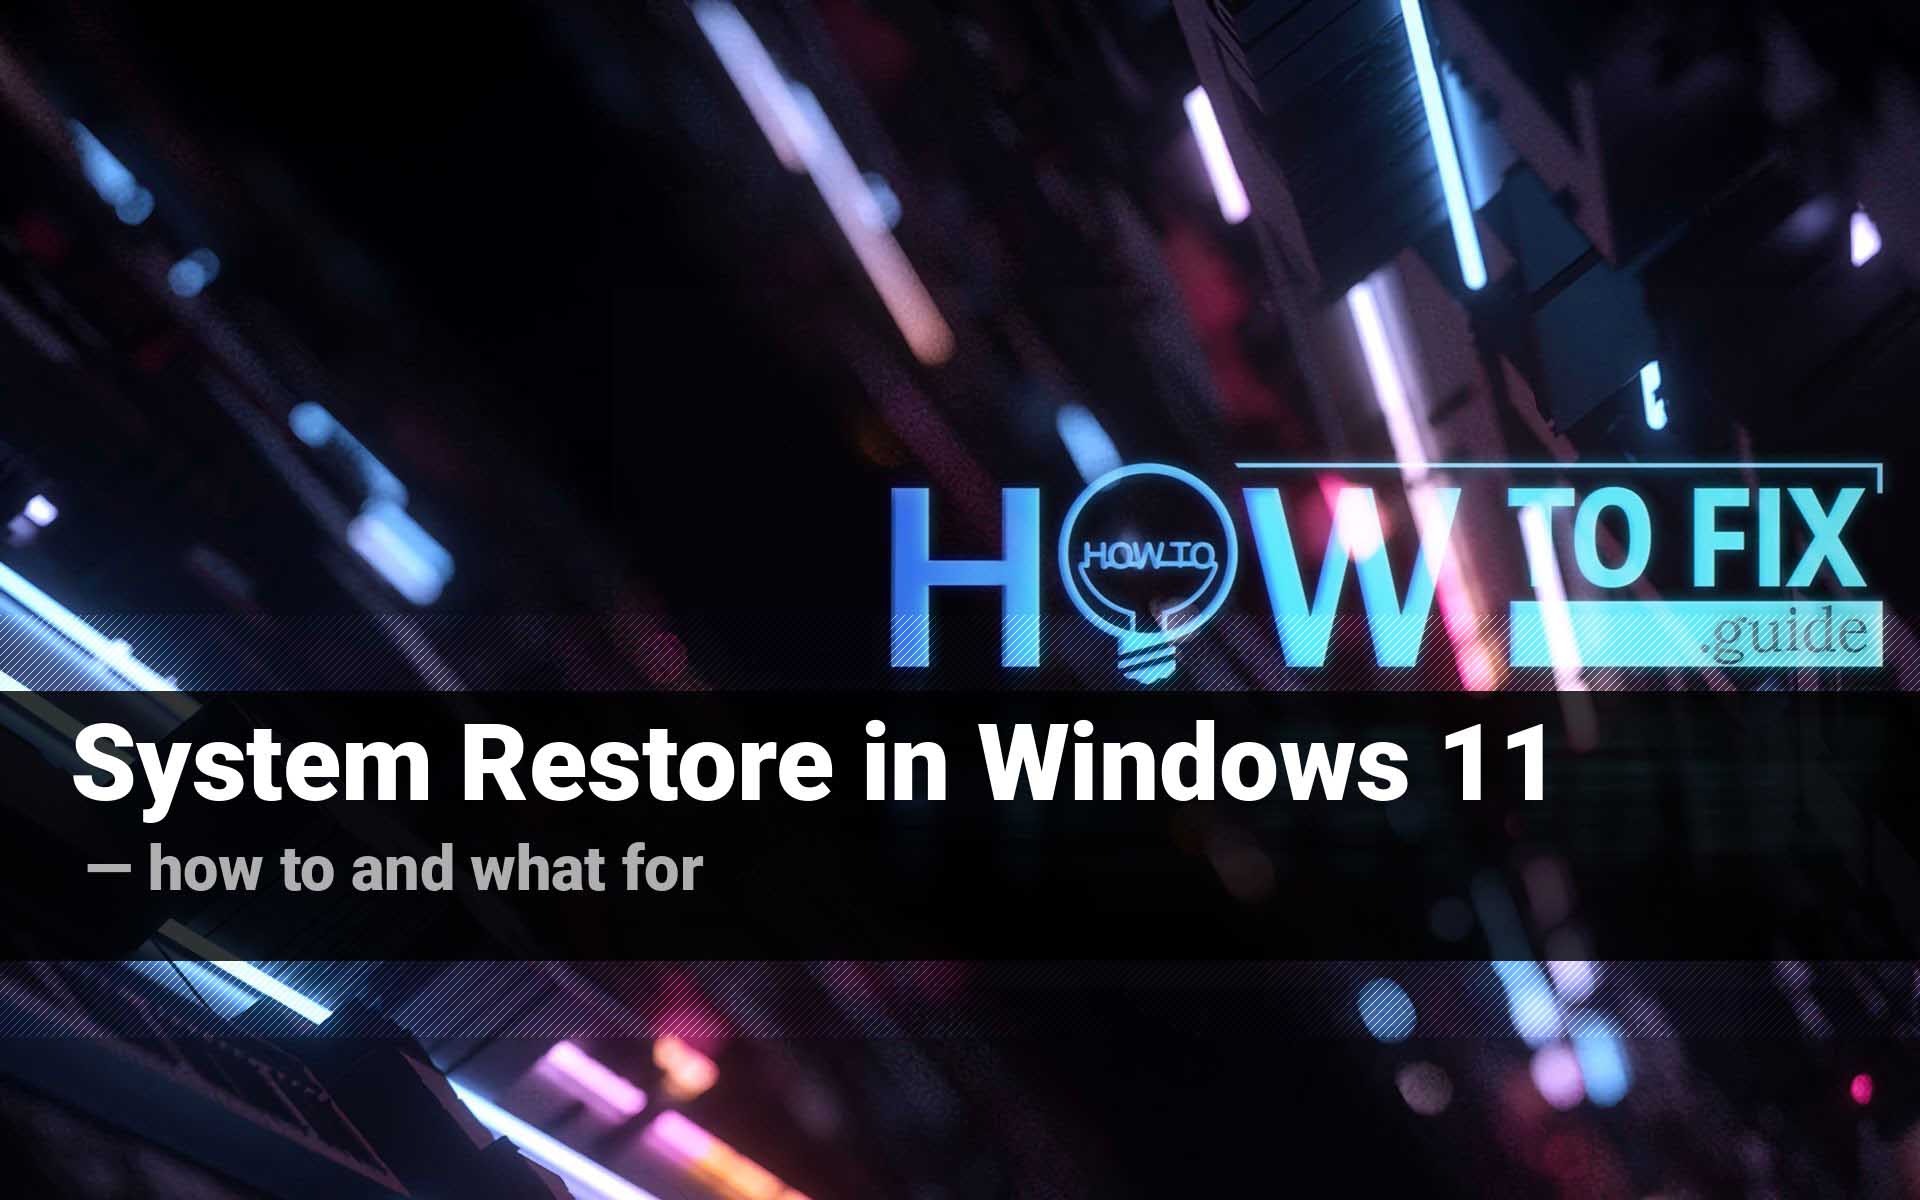 Guide to Windows 11 System Restore: How to Restore, Disable, and Troubleshoot